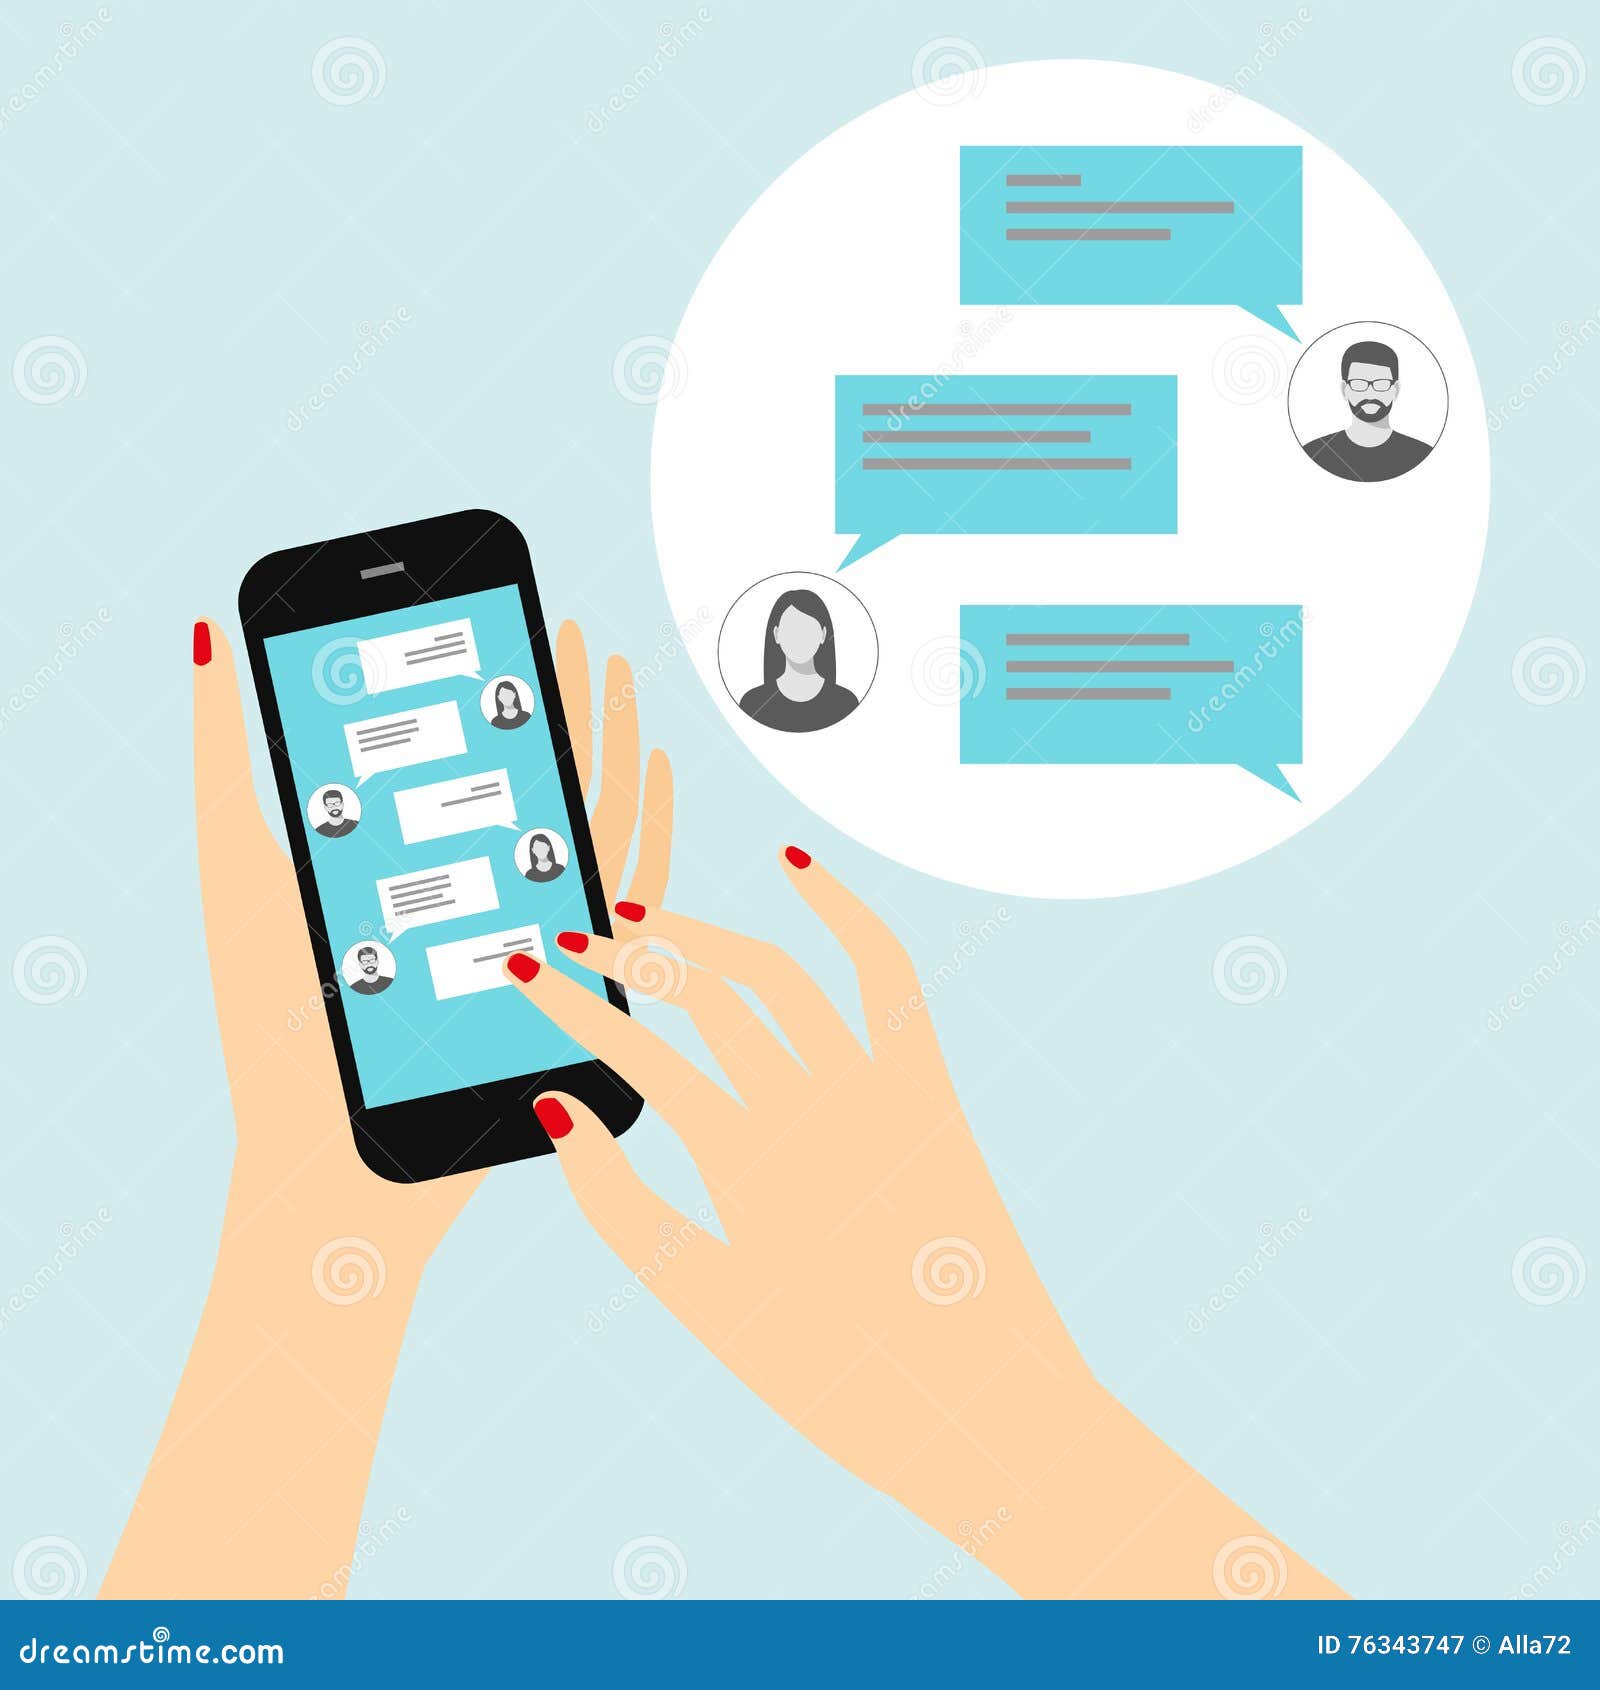 sending messages to friends via instant messaging. female hand holding a smartphone with a chat on the display